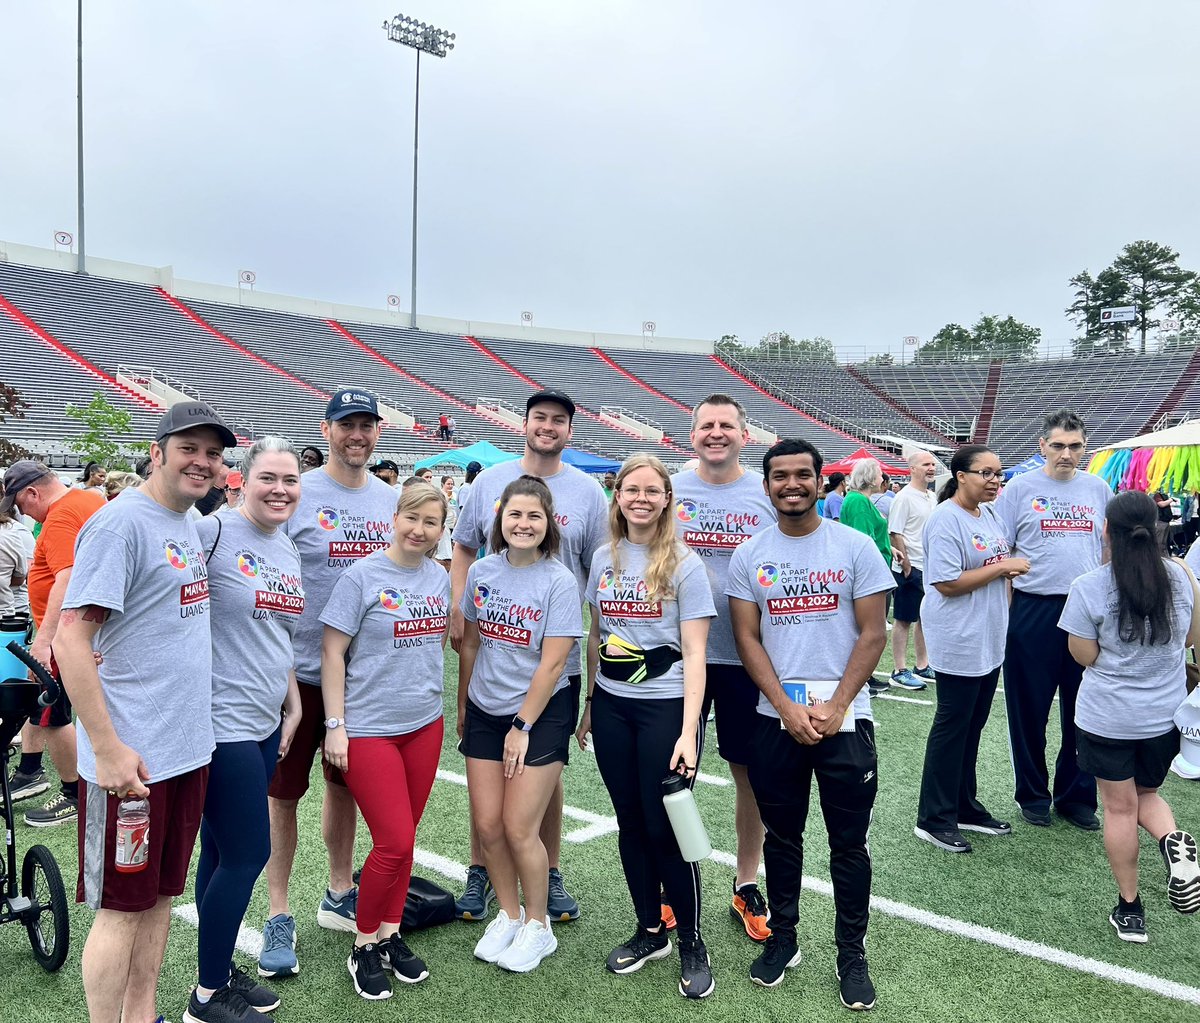 This morning we walked to support cancer research at @uamscancer 🧫
#WalkForACause #SupportCancerResearch #CancerAwareness
#FightCancer
#HealthcareFundraiser
#MakingADifference